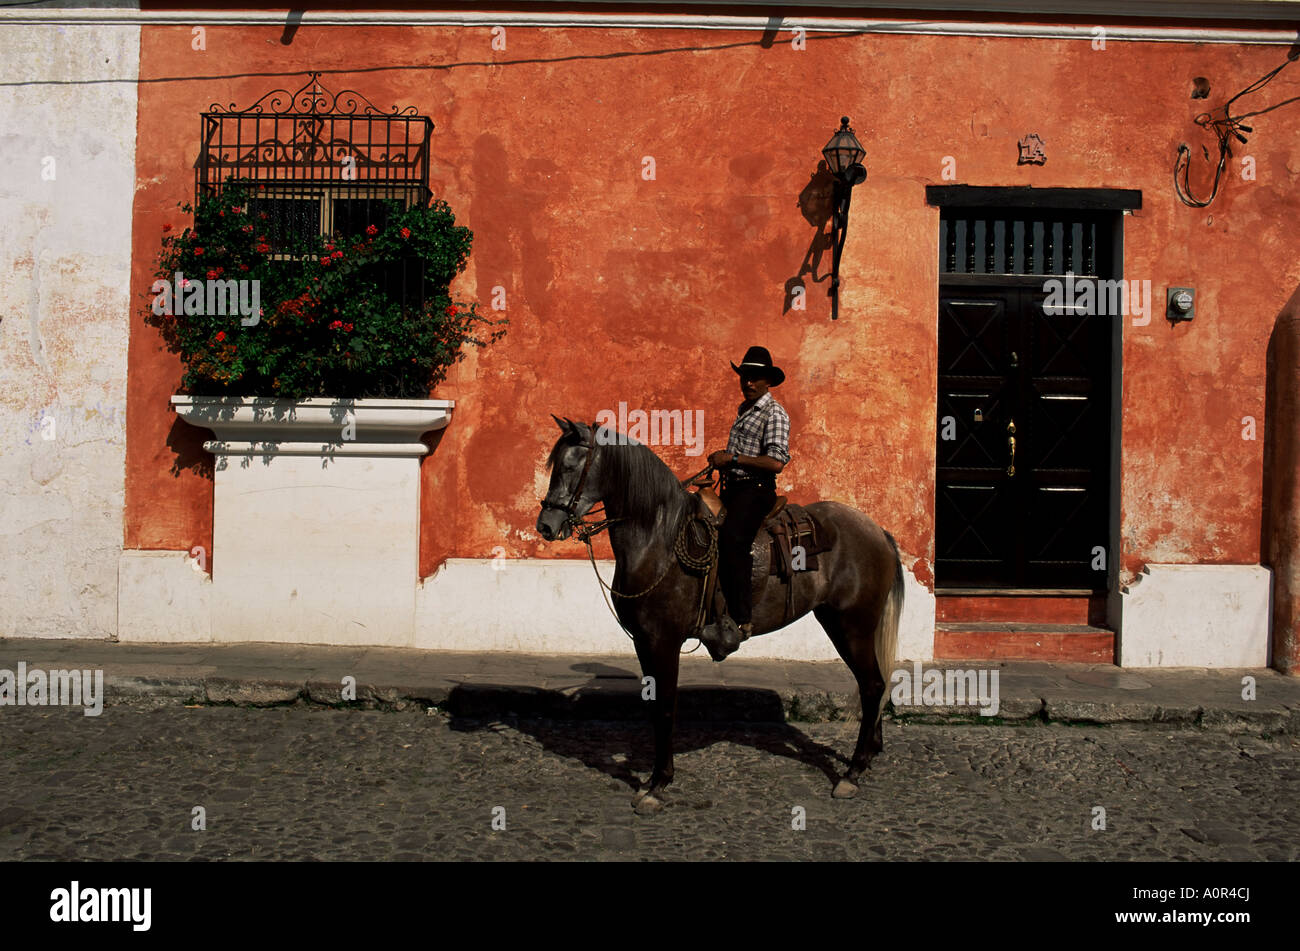 Man on horse in front of a typical painted wall Antigua Guatemala Central America Stock Photo